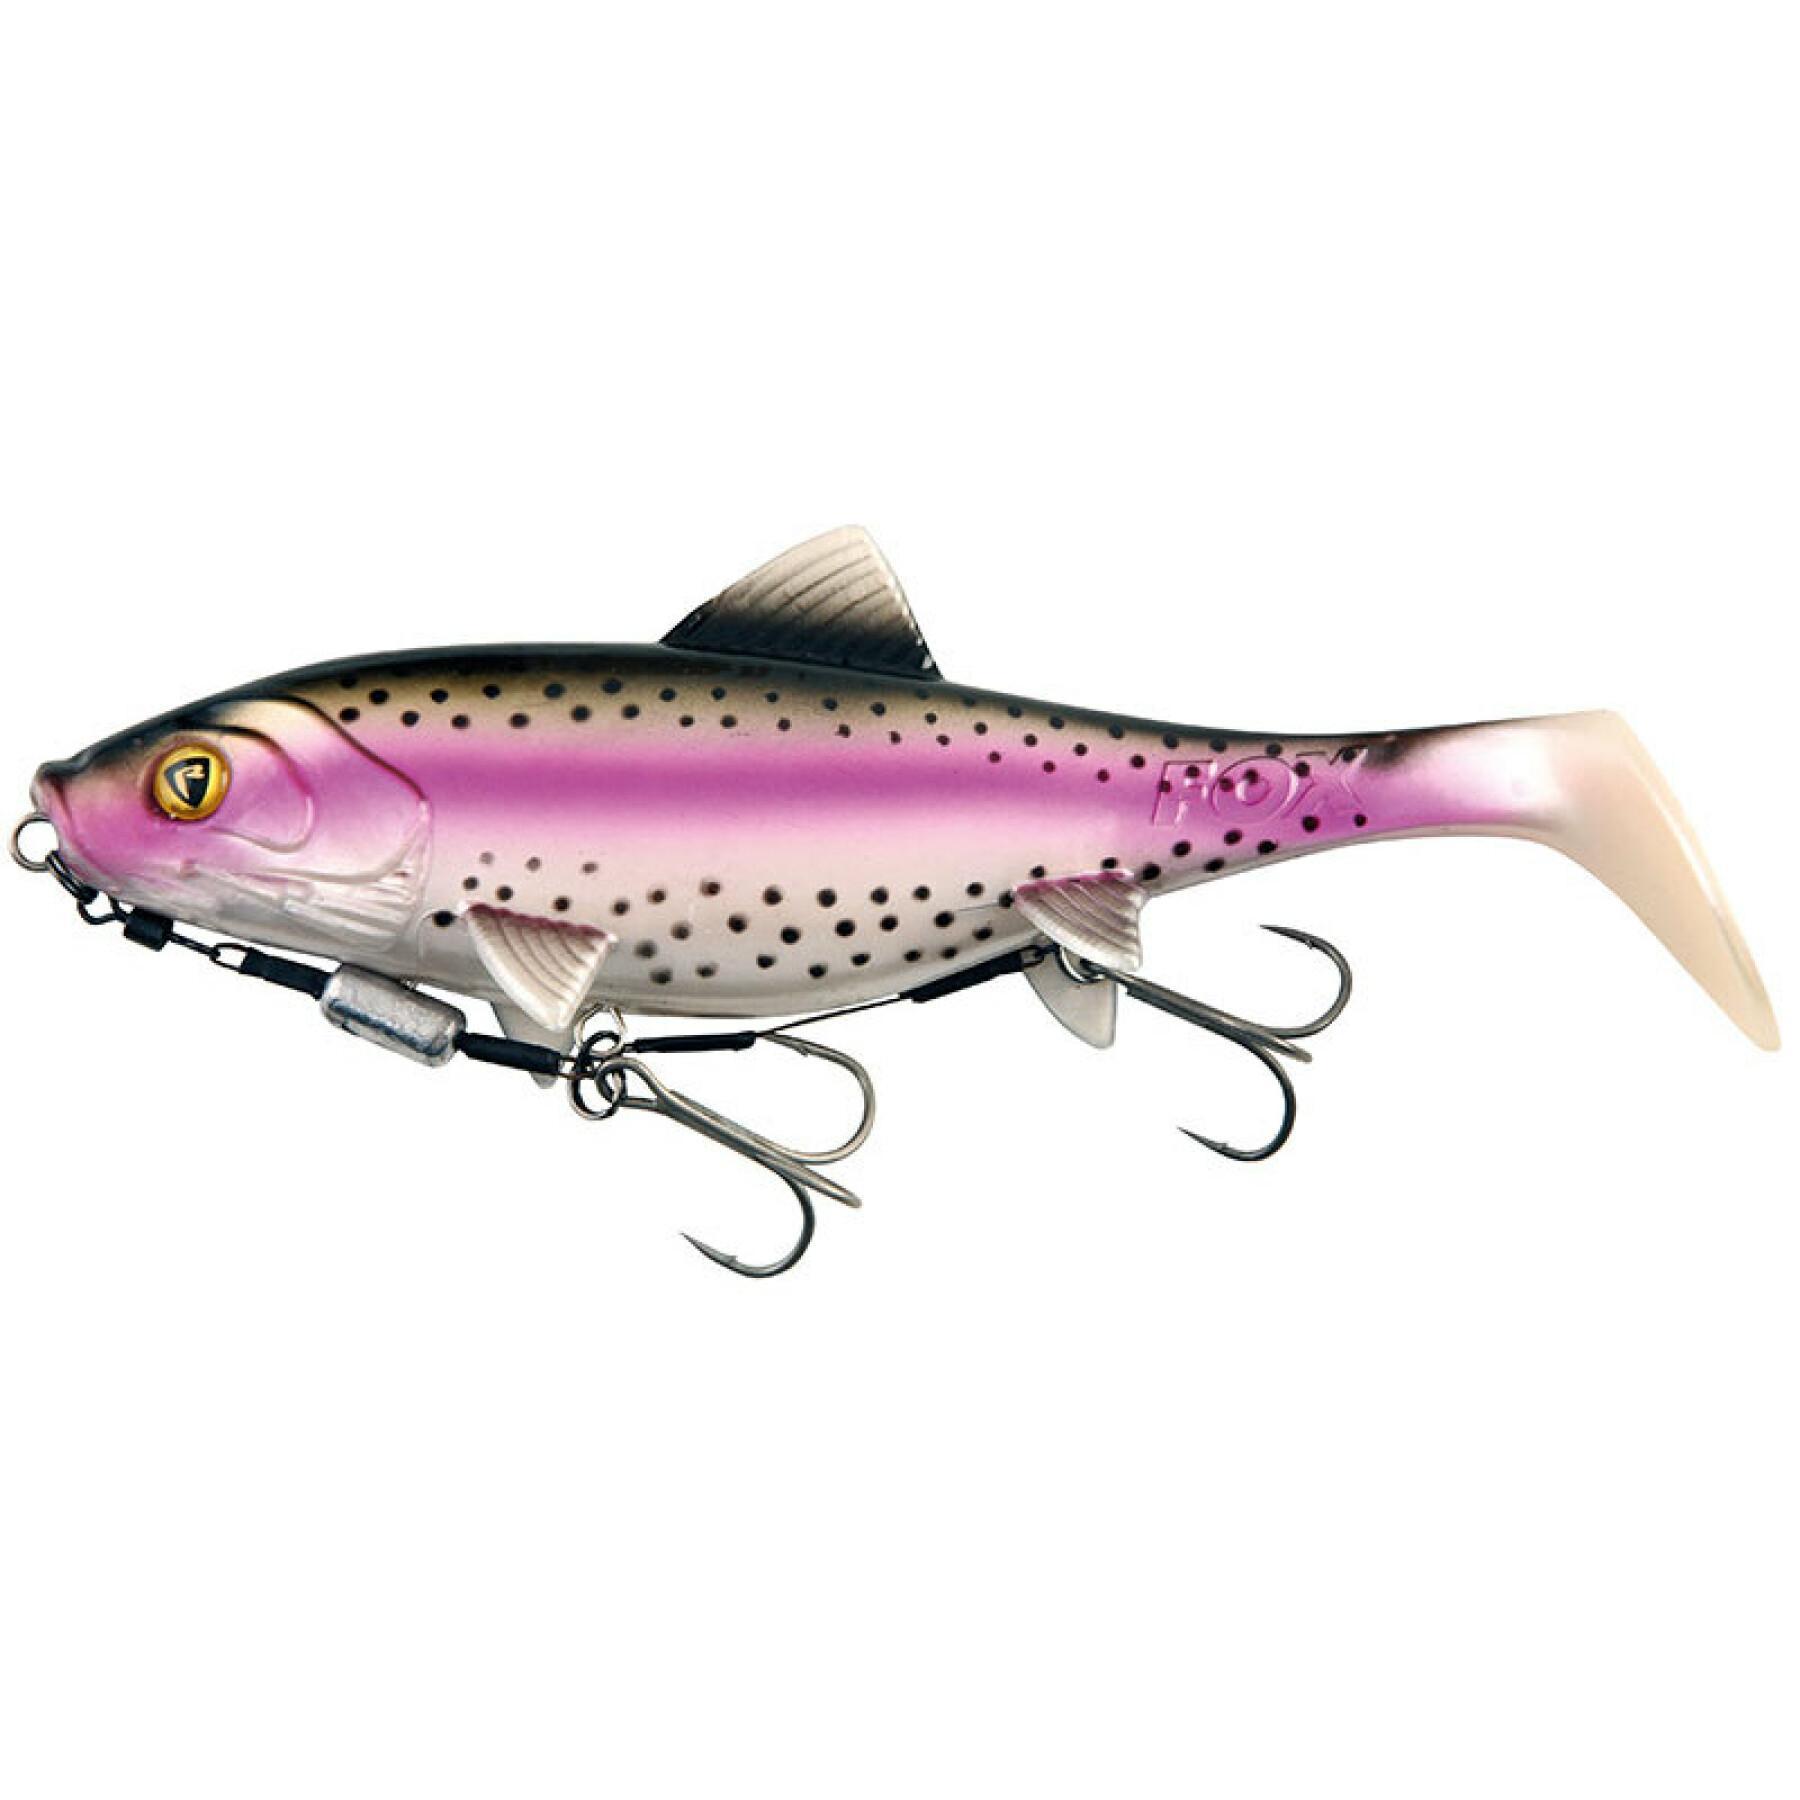 Supernatural replicant trout lure Fox Rage shallow 7" 70g x 1pc